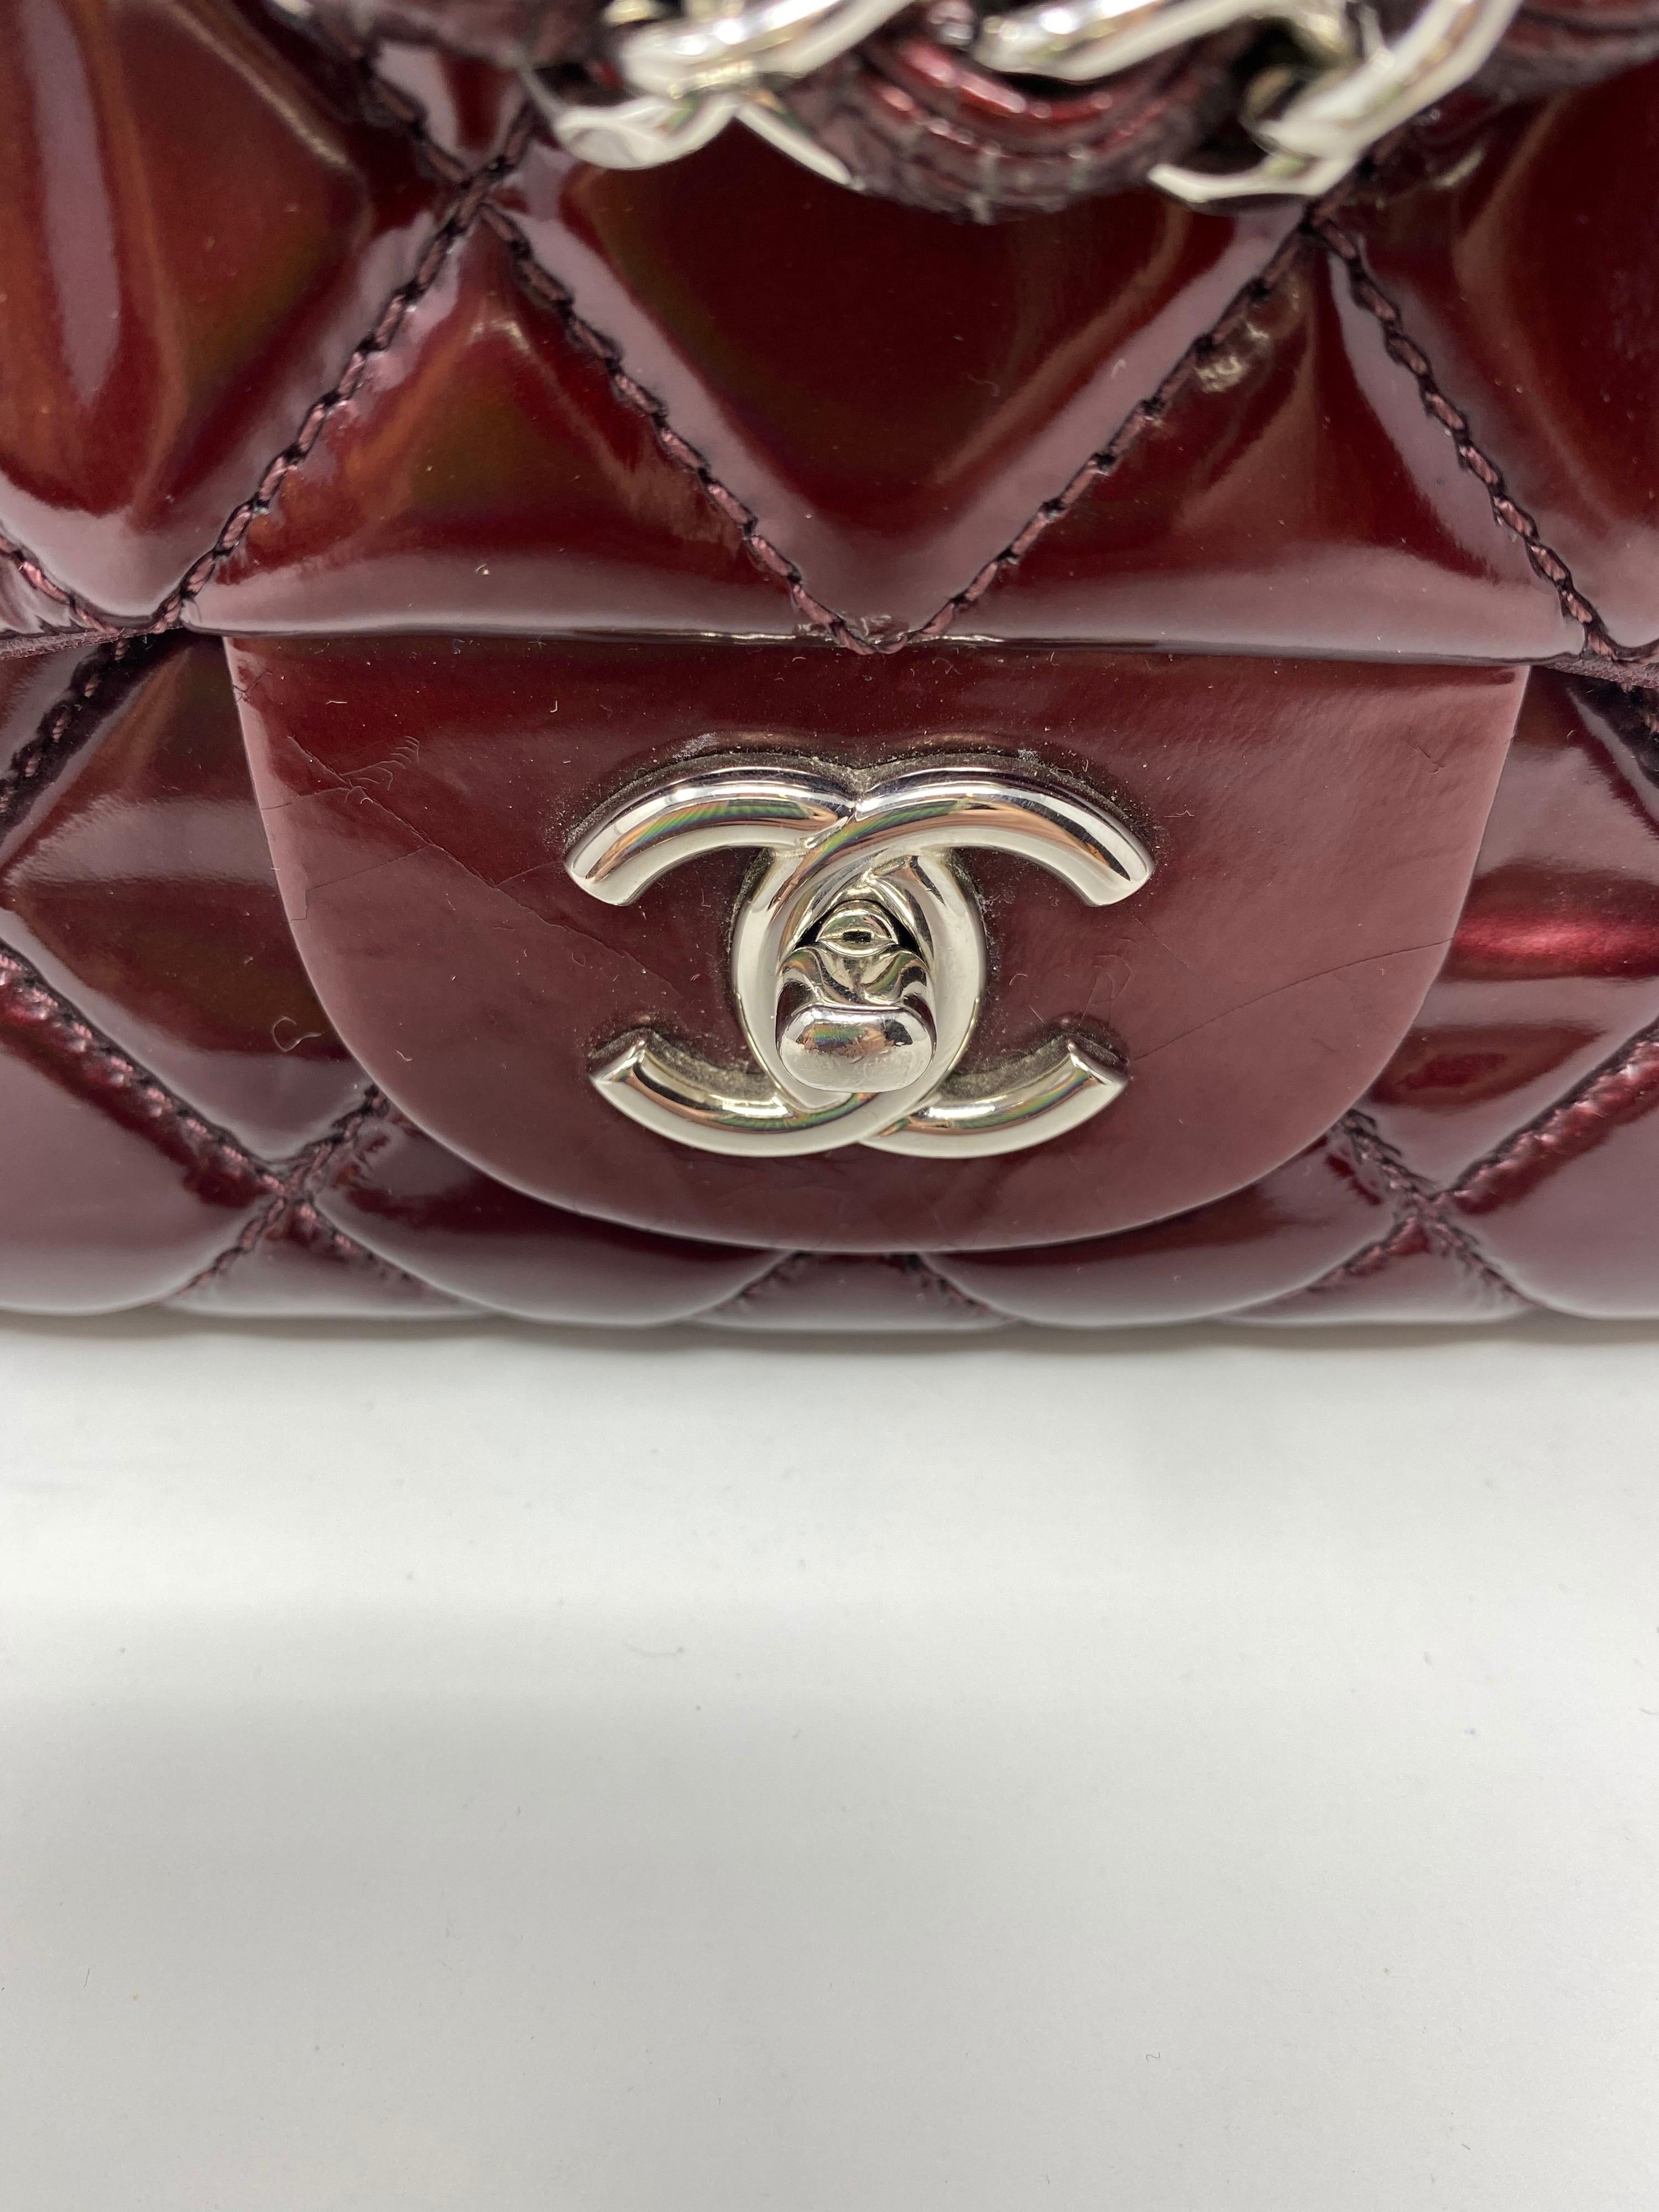 Chanel Burgundy Patent Leather Jumbo Bag. Good condition Chanel bag with silver hardware. Inside clean. Light wear. Please view all photos. Marks inside from impression of the leather. Guaranteed authentic. 